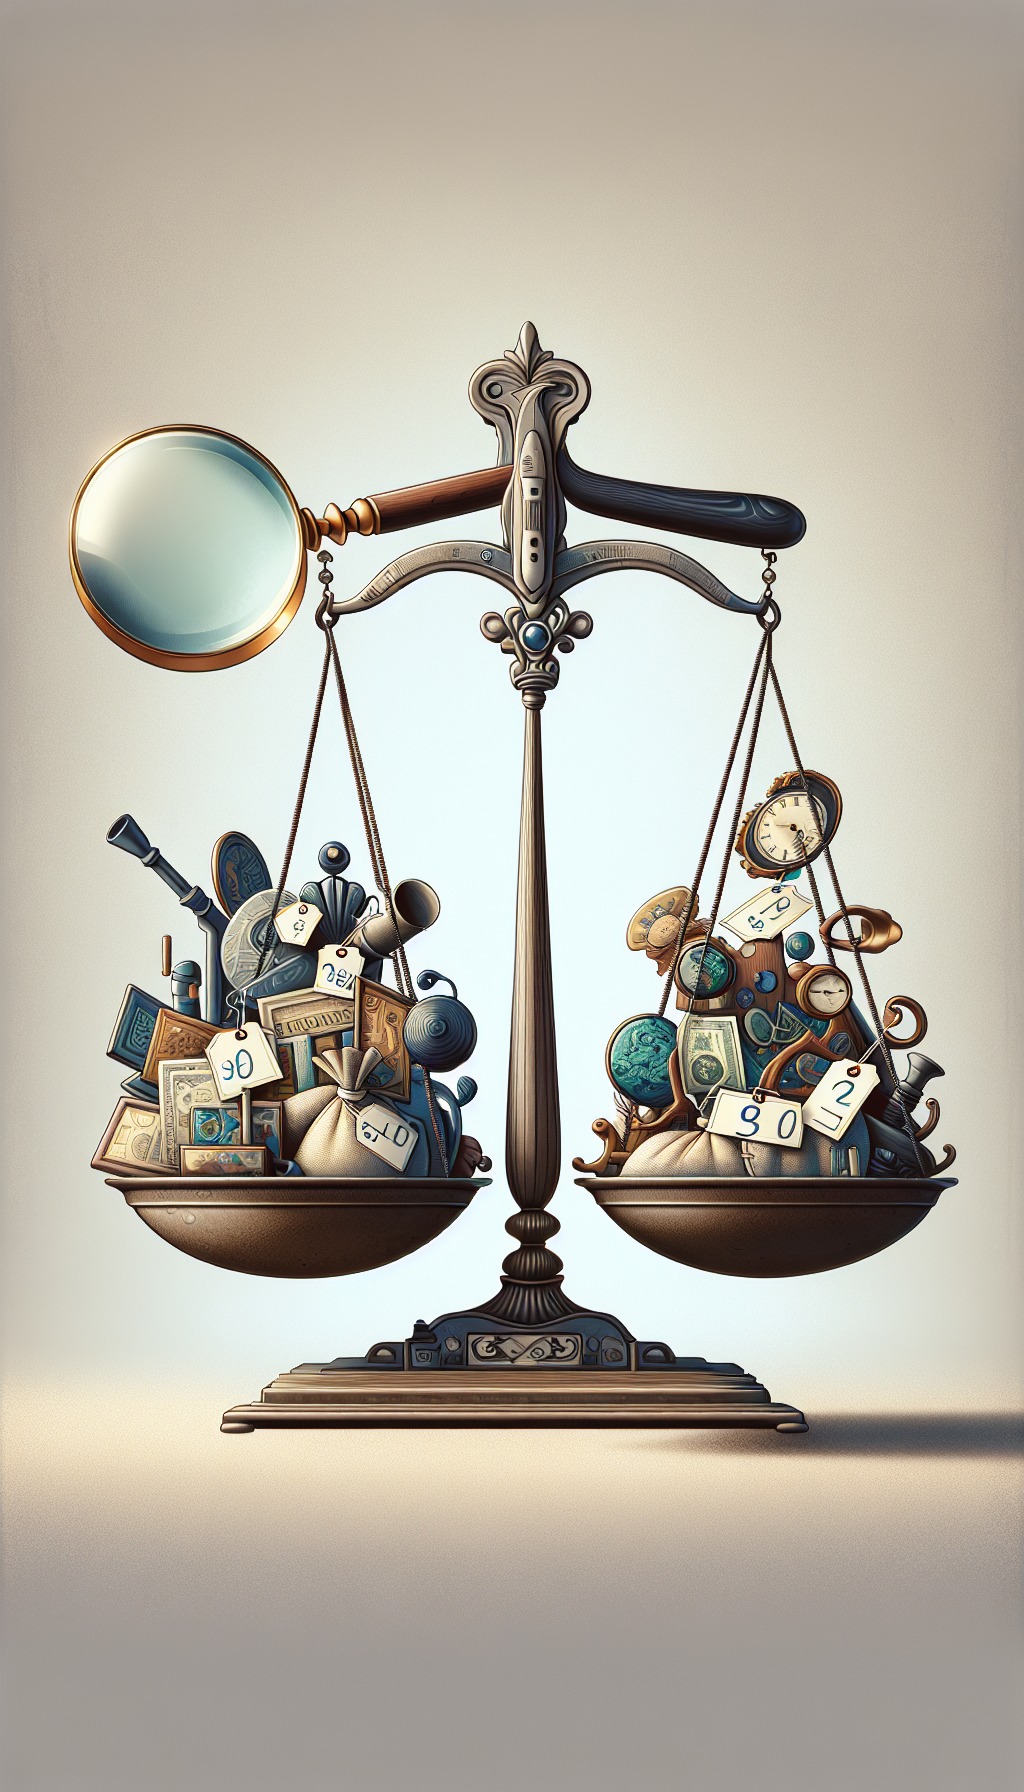 A whimsical scale balances on one side, a magnifying glass inspecting a pile of eclectic antiques, and on the other, a sack of cash with price tags floating upward. Each tag symbolizes a different antique era, graphically styled as vintage, art deco, and modernist, signifying the appreciation of value across different time periods in the art of appraisal and sale.